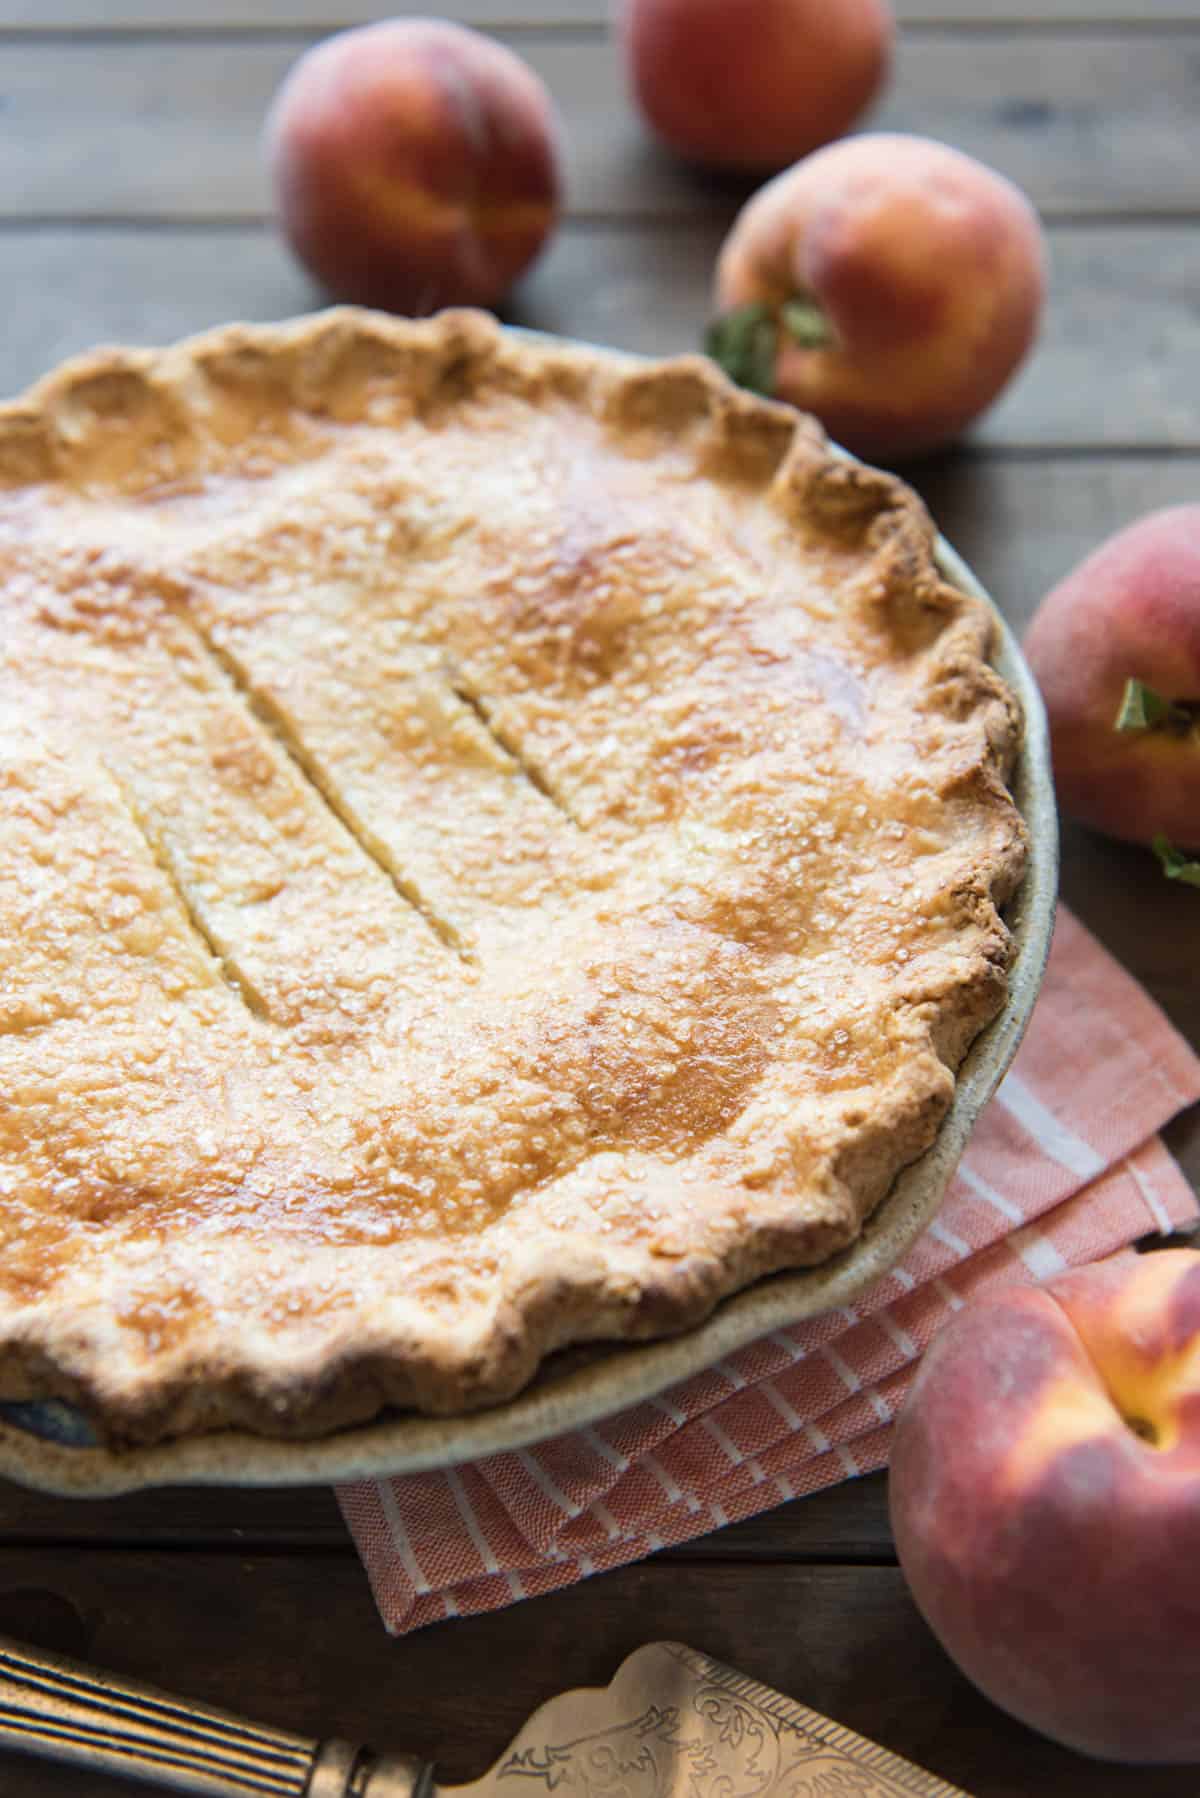 An image of a peach pie with fresh peaches in the background.